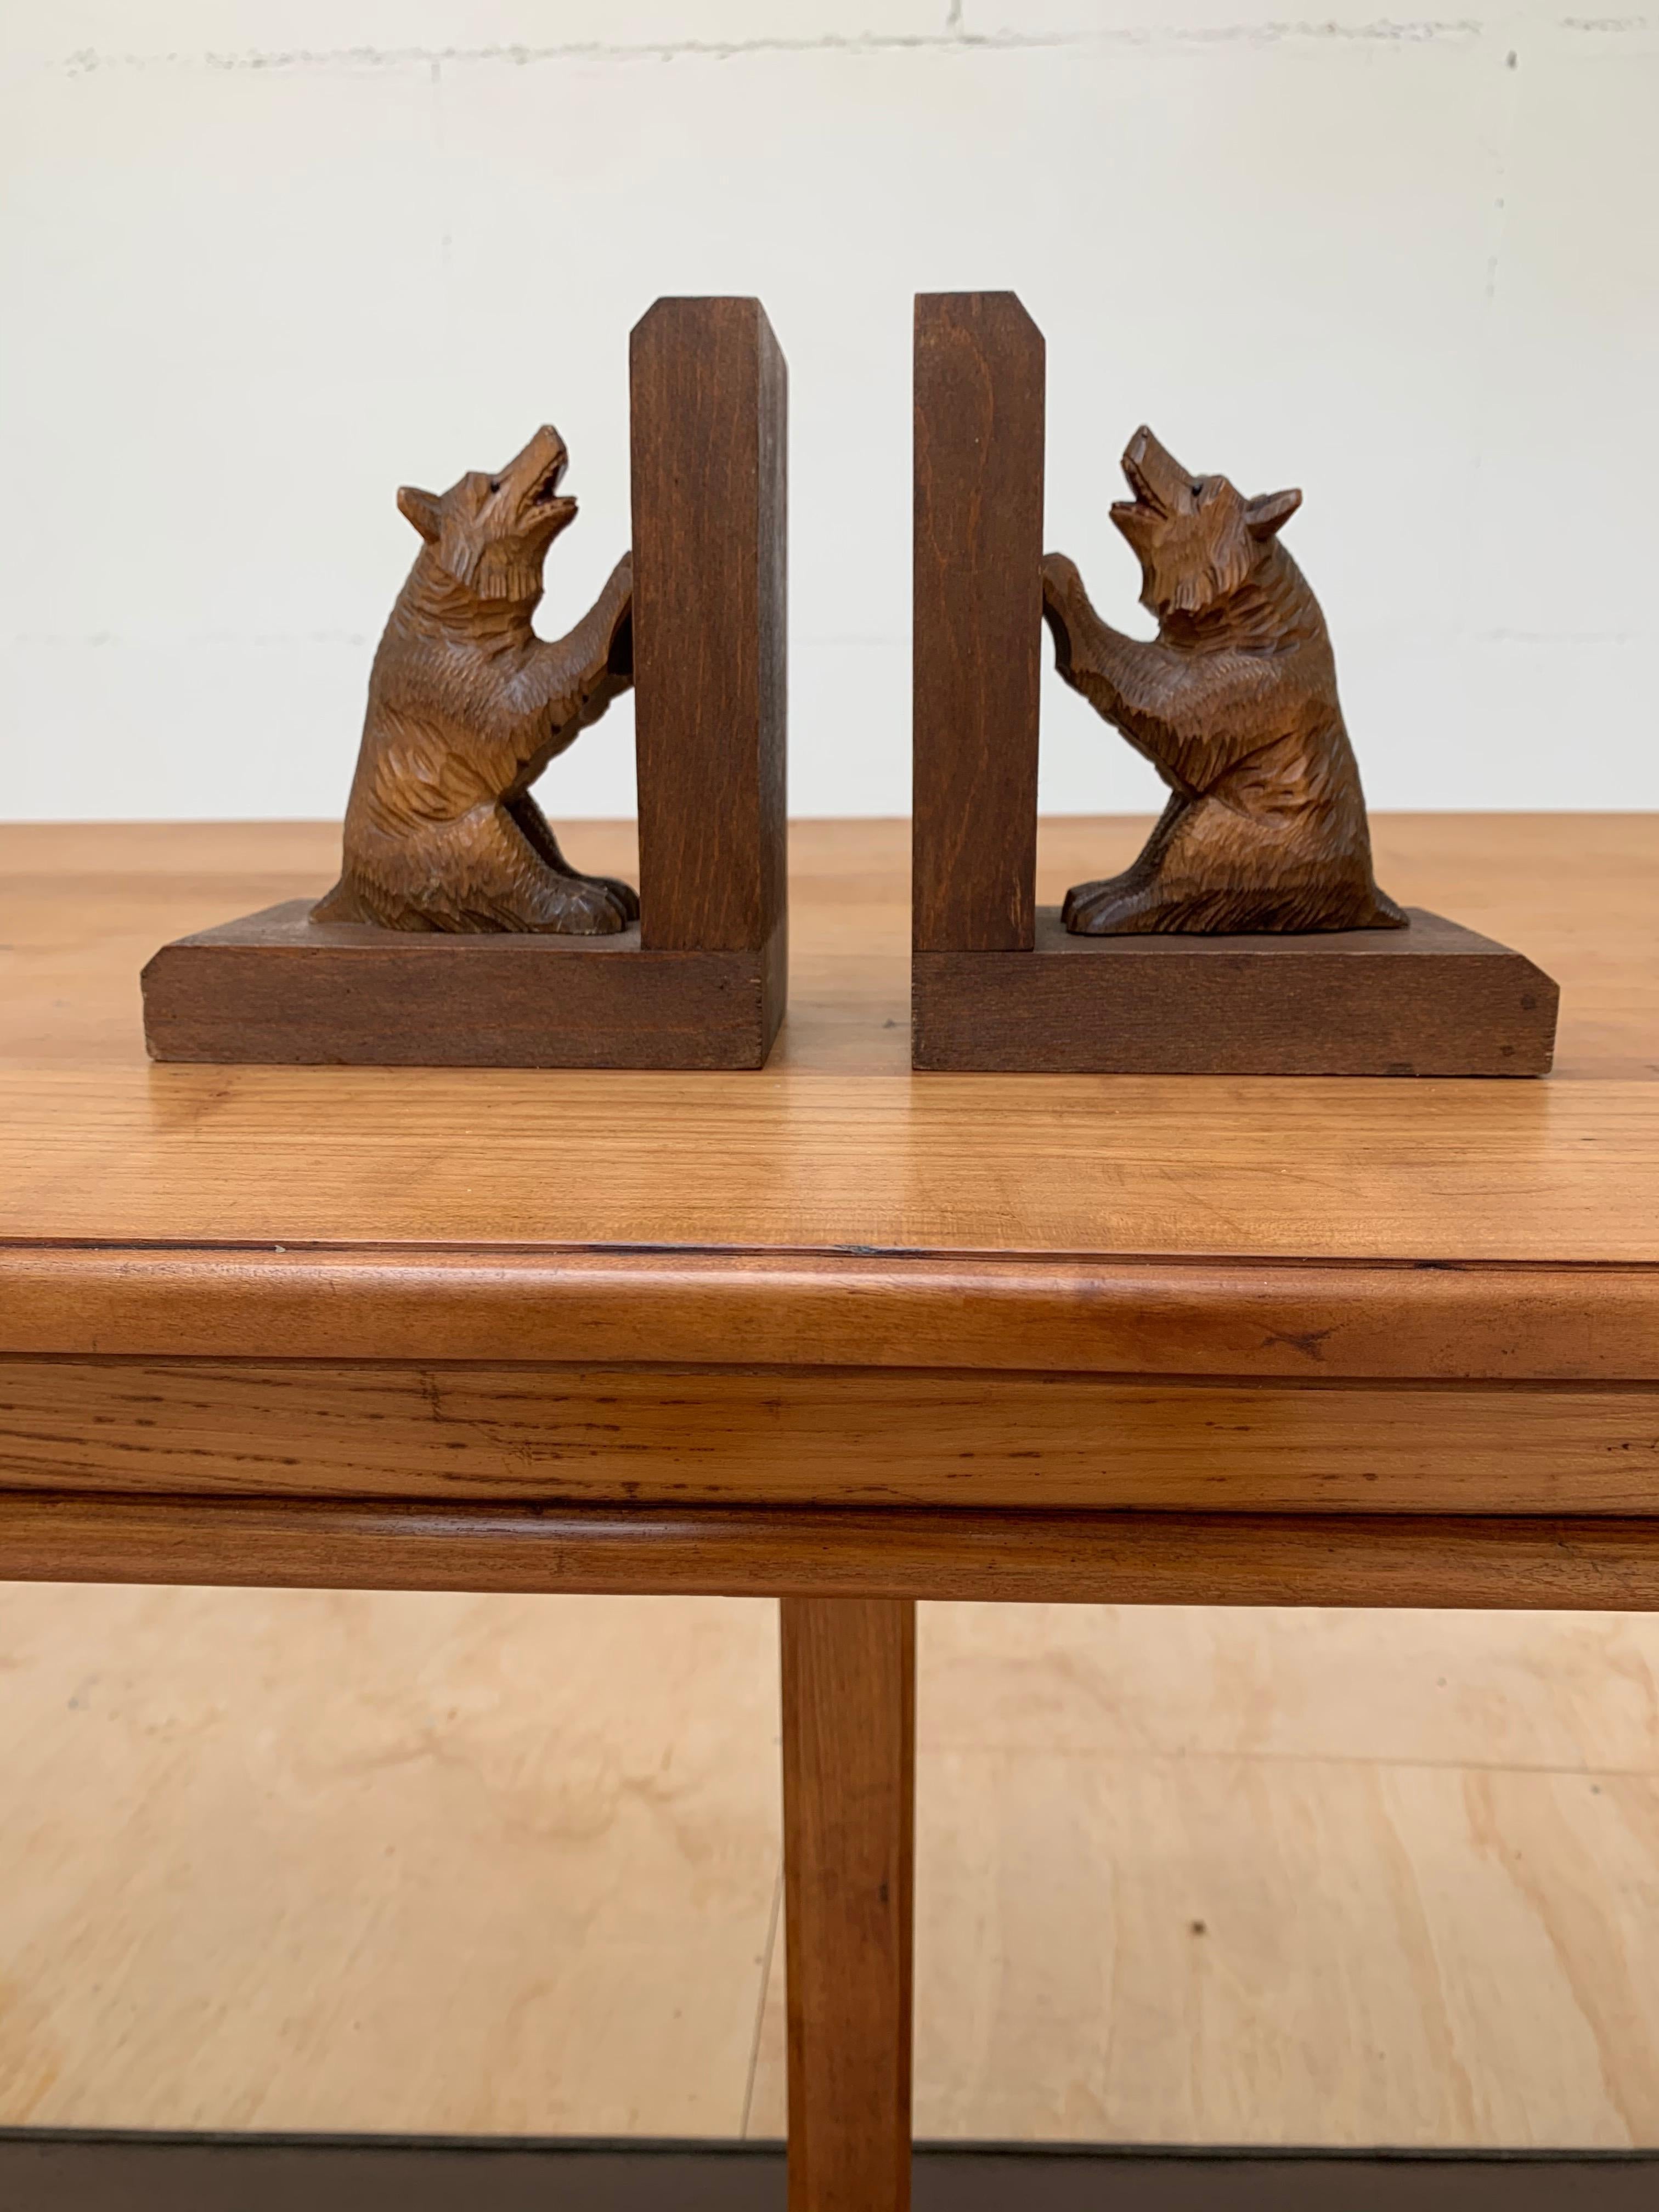 Early 20th Century Art Deco Era Bookends with Hand Carved Bear Sculptures For Sale 10